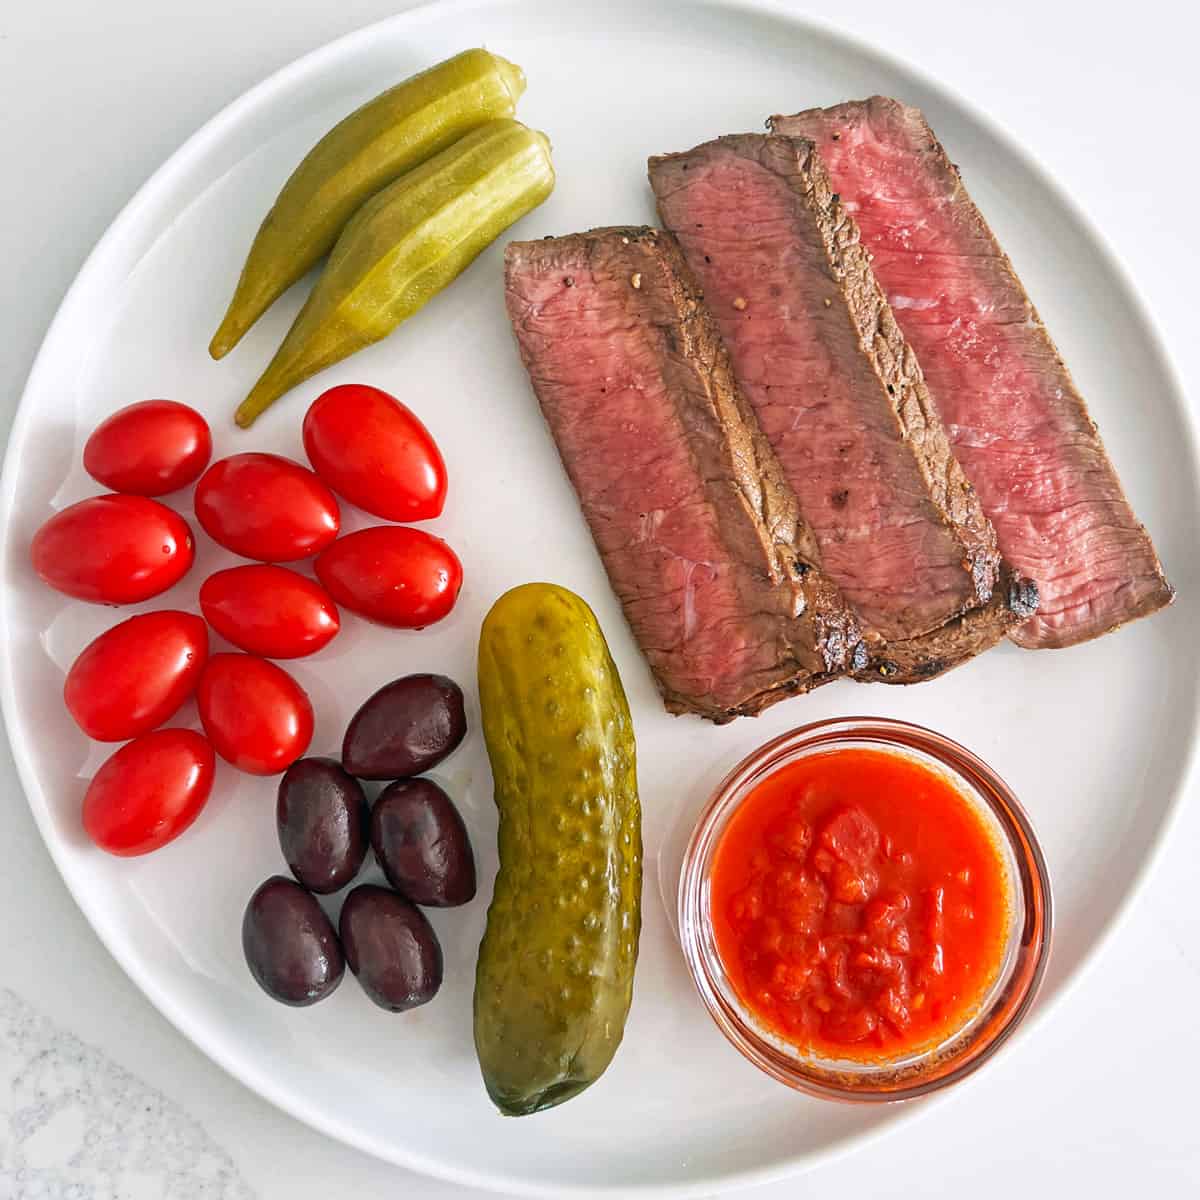 Leftover London broil served with tomatoes and pickles.